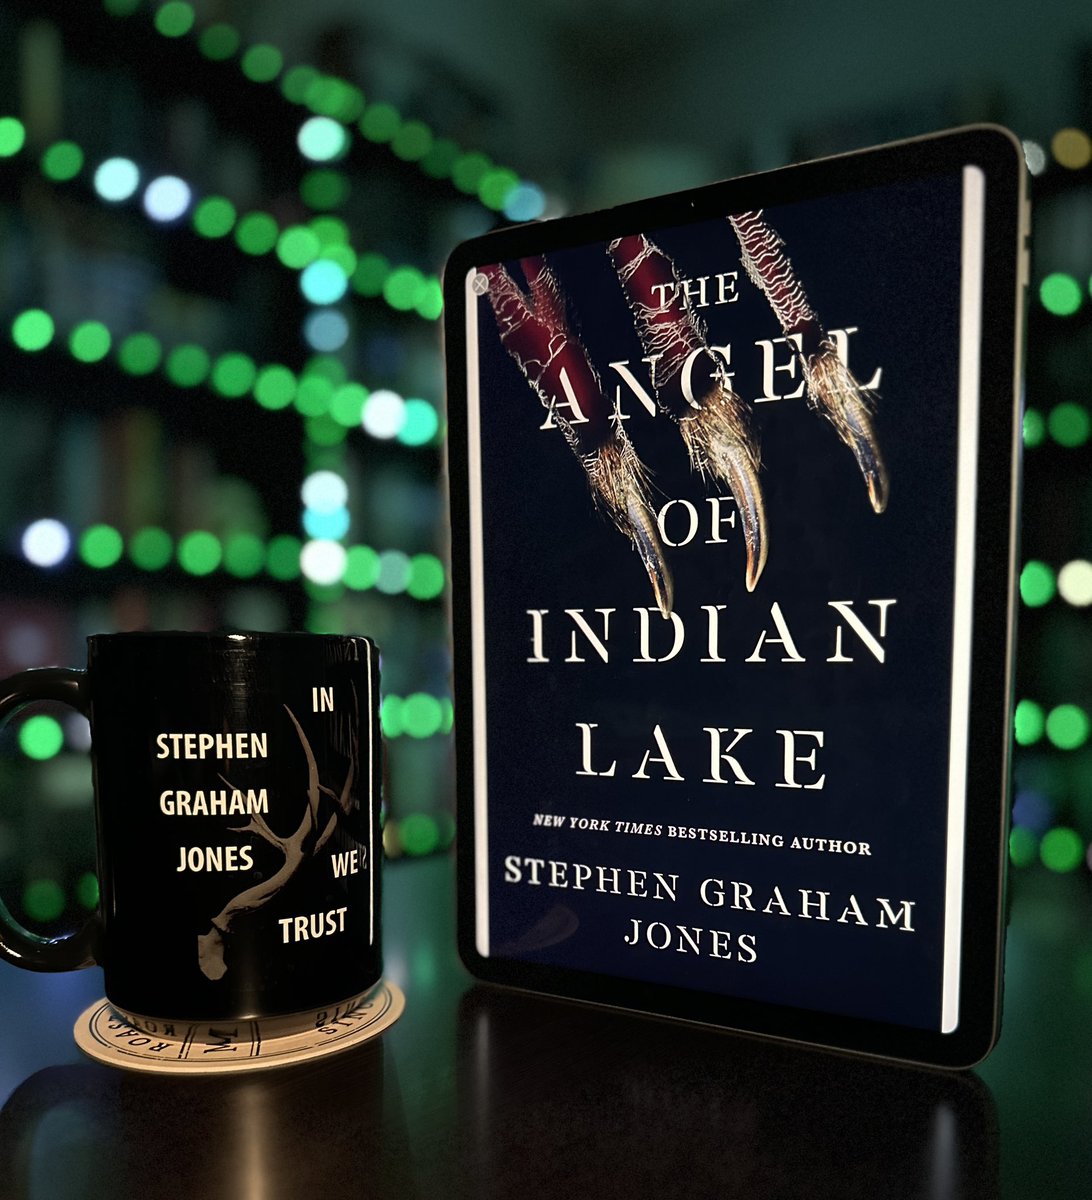 All right. Pups are fed and walked, my long run is done, it’s time to read the final chapter…

#Horror #TheAngelOfIndianLake #StephenGrahamJones #Reading